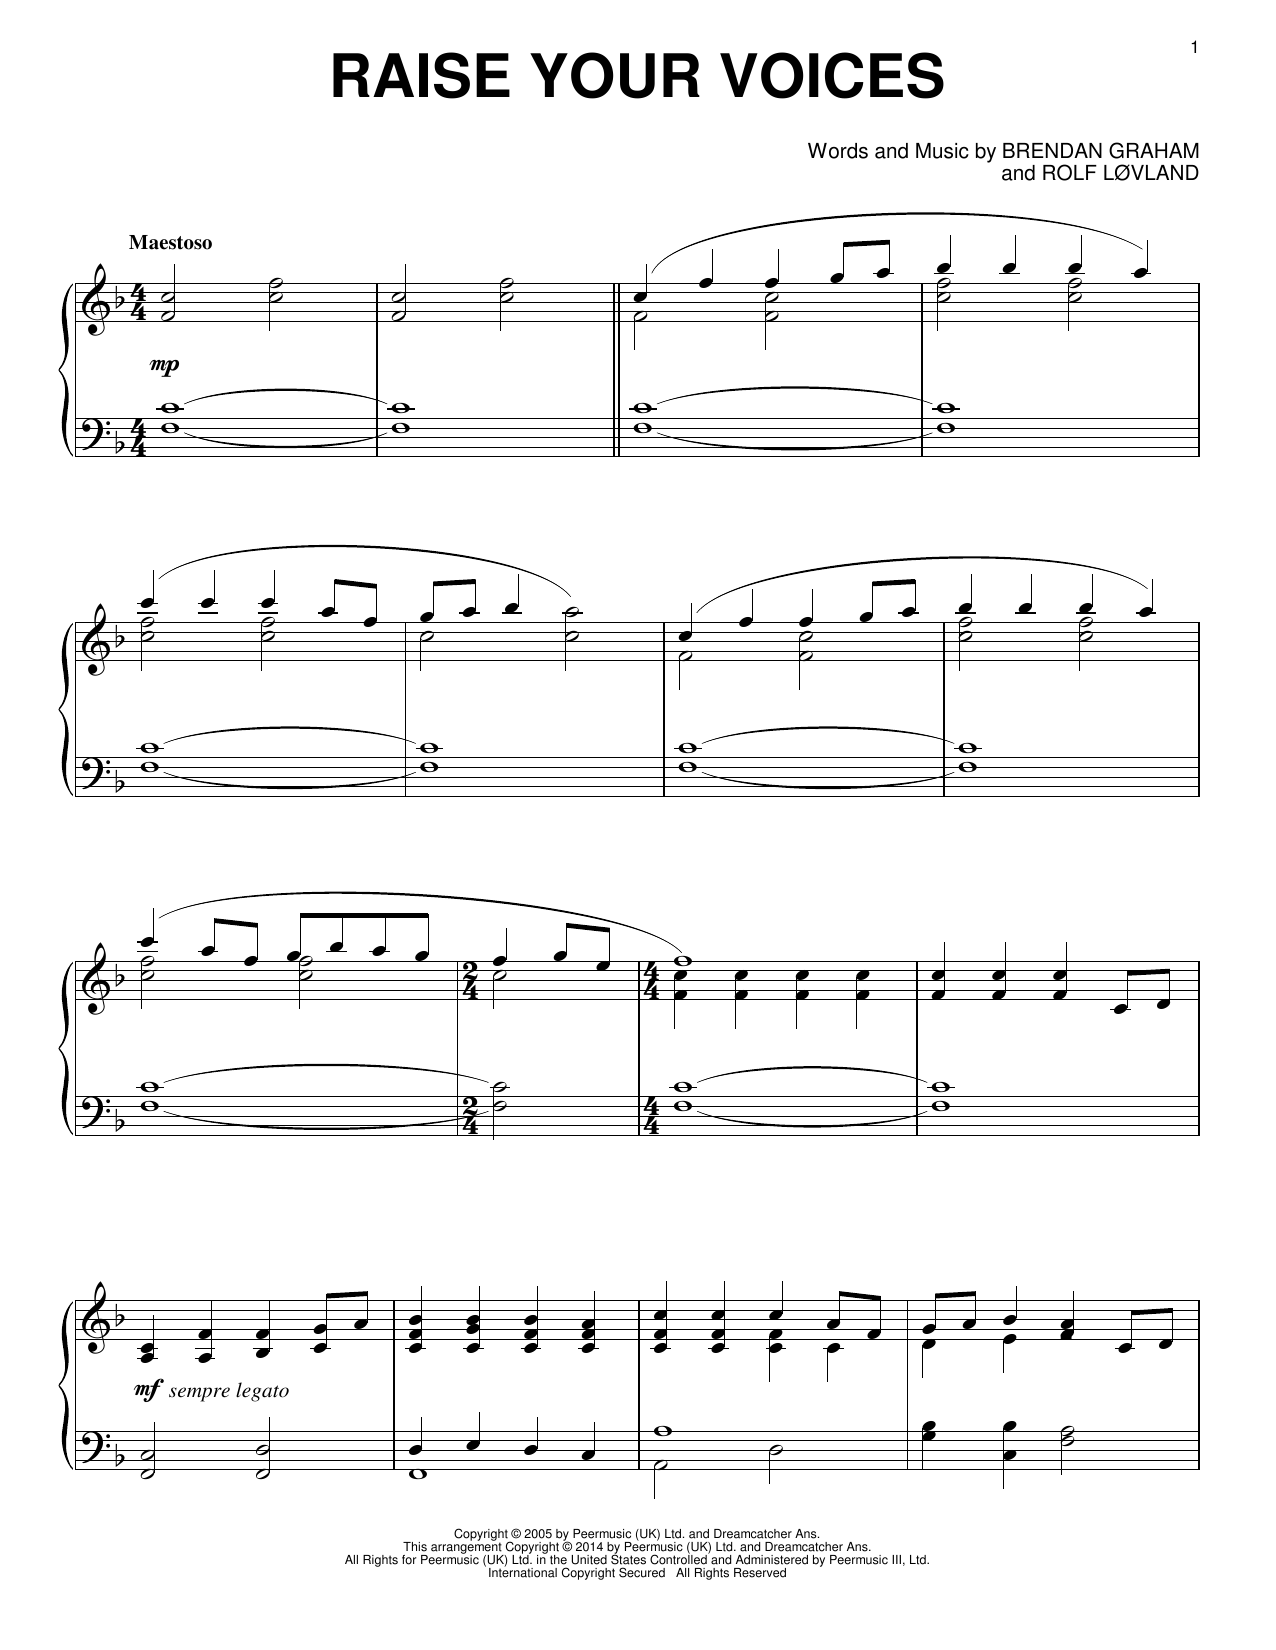 Download Rolf Lovland Raise Your Voices Sheet Music